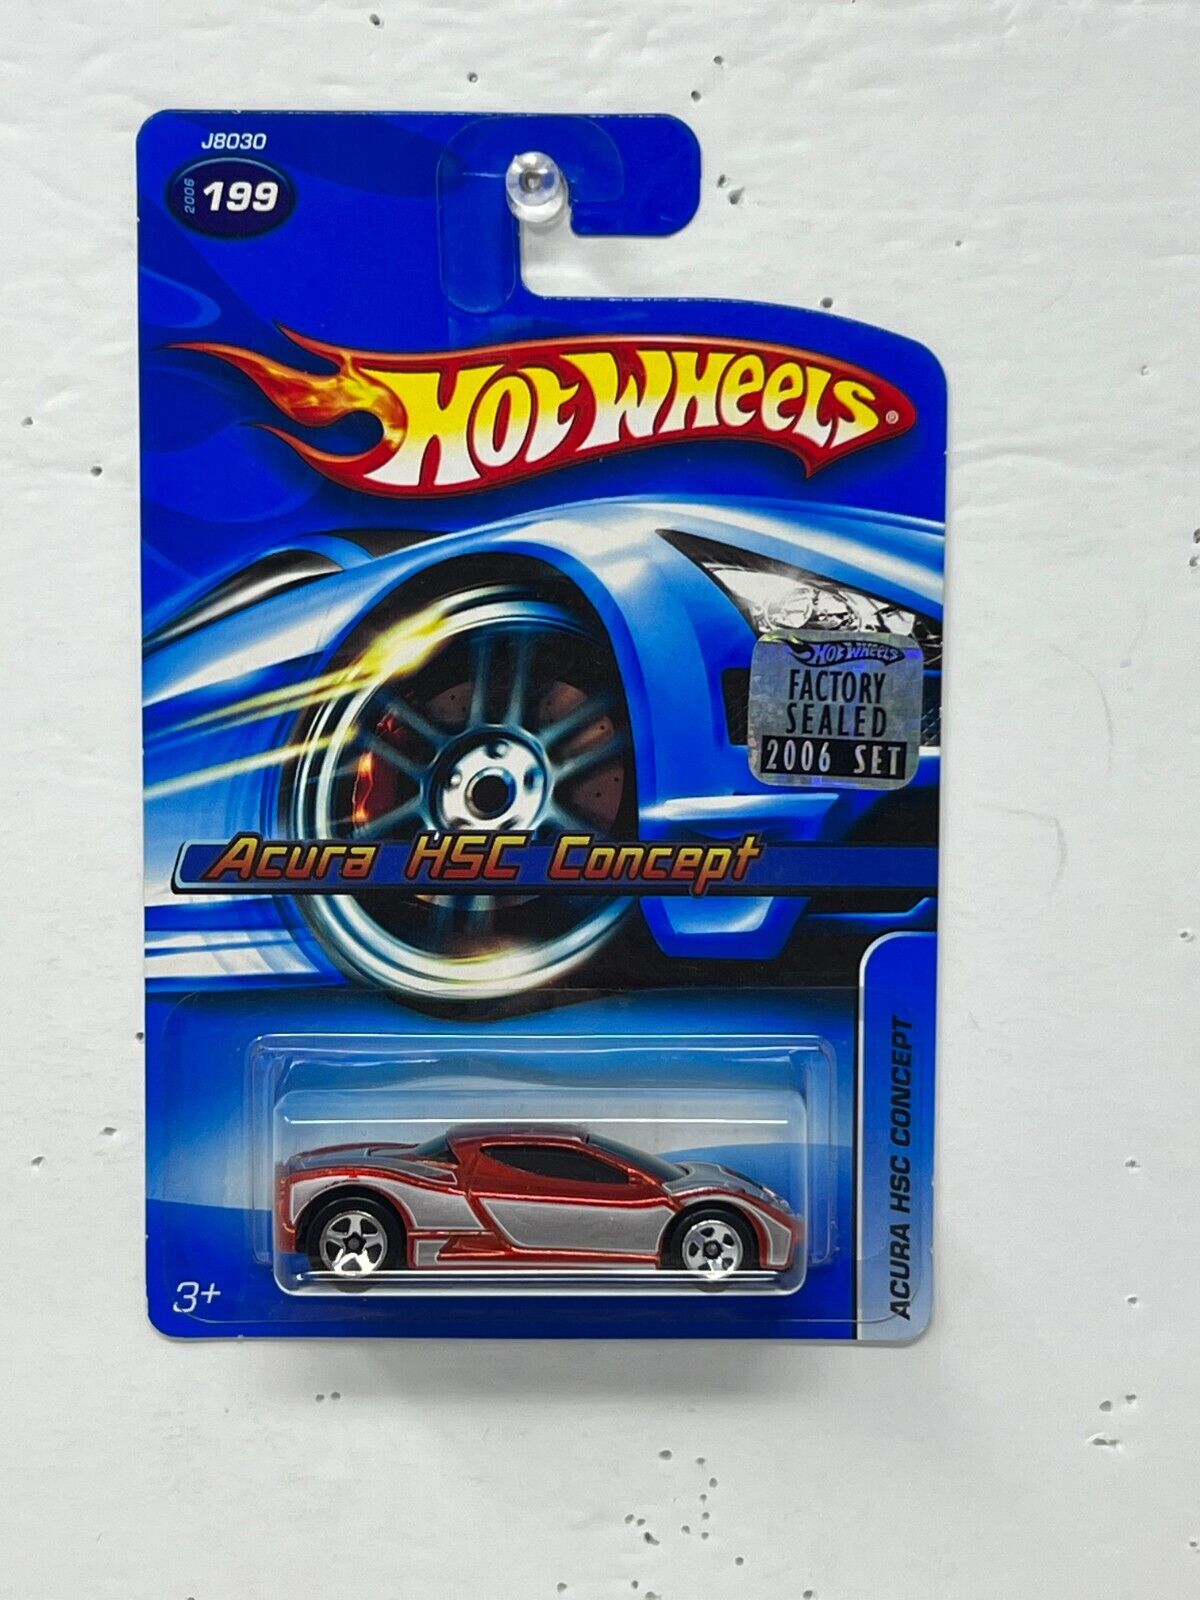 Hot Wheels Acura HSC Concept JDM 1:64 Diecast Factory Sealed 2006 Set